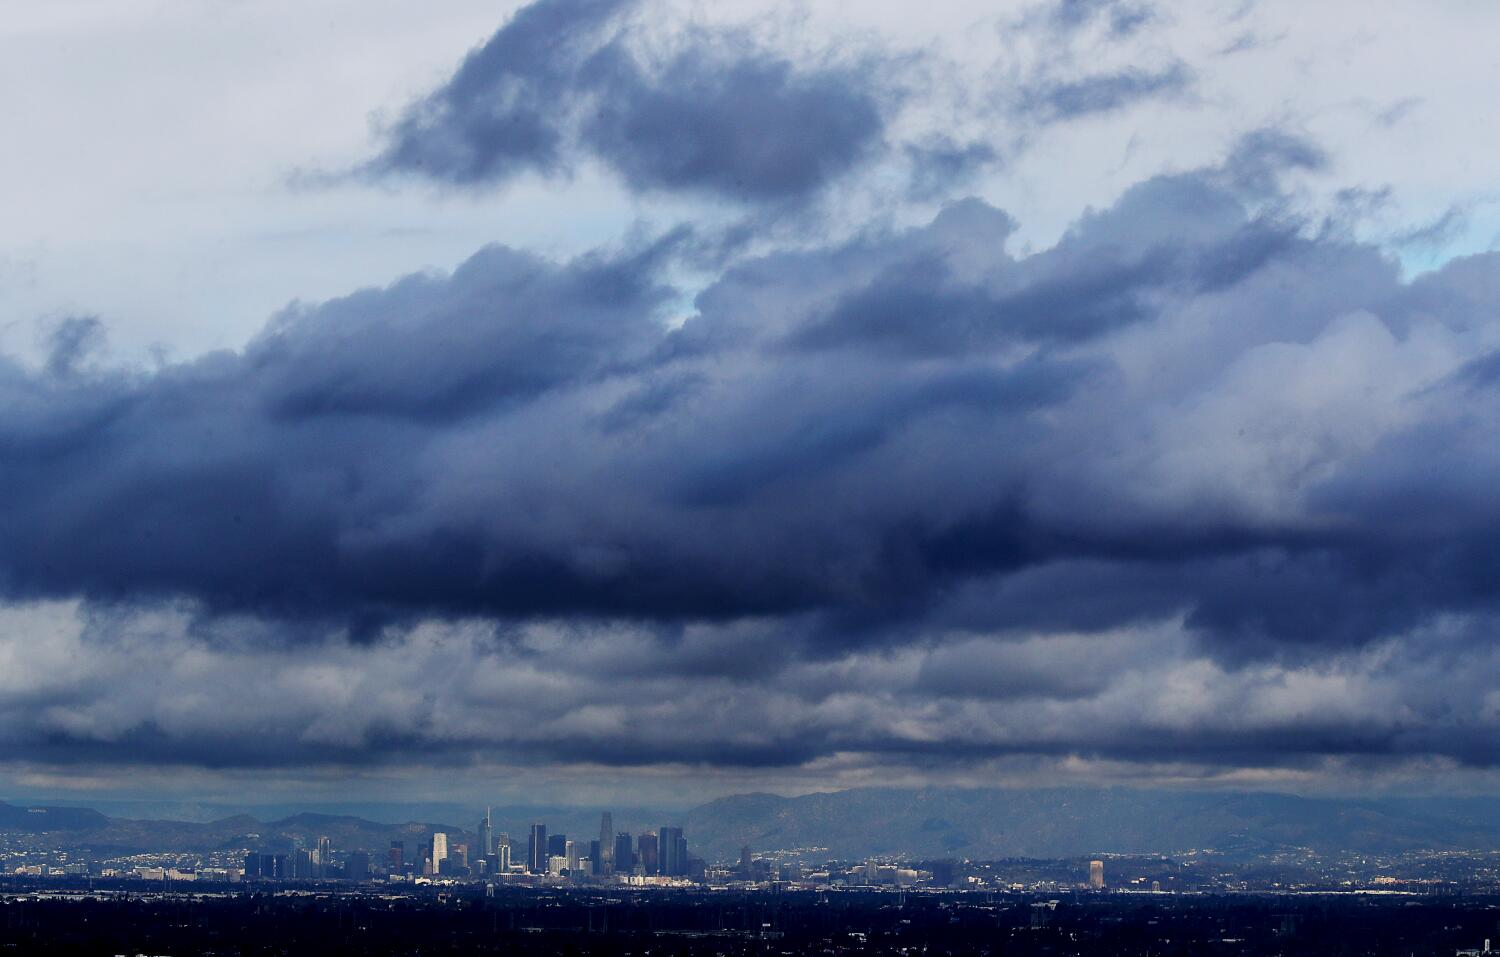 Cloudy skies, cooler temperatures and light rain expected across L.A. County this week